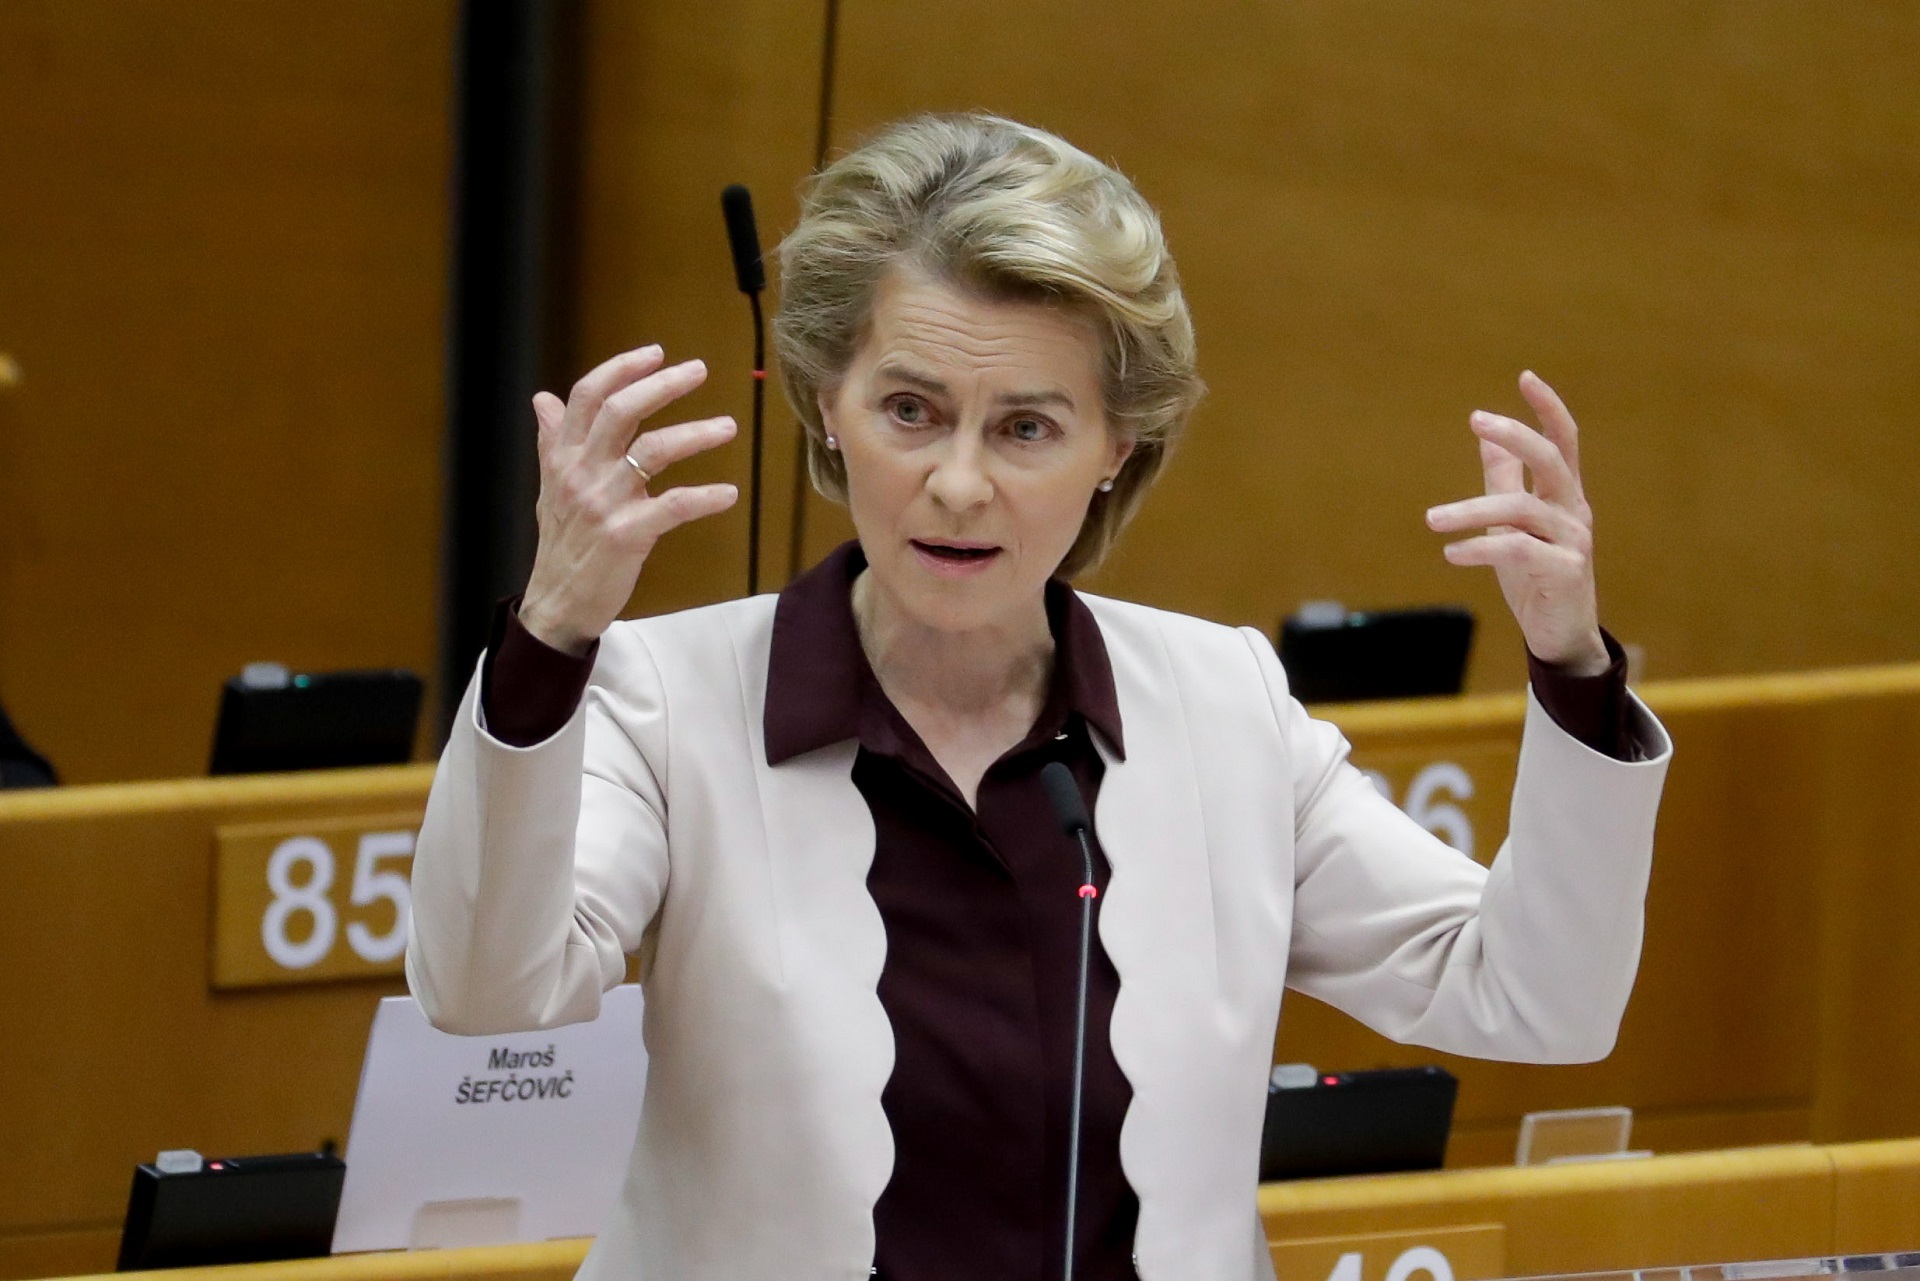 epa08561911 European Commission President Ursula Von Der Leyen speaks during a plenary session on the conclusions of the extraordinary European Council meeting at the European Parliament in Brussels, Belgium, 23 July 2020.  EPA/STEPHANIE LECOCQ